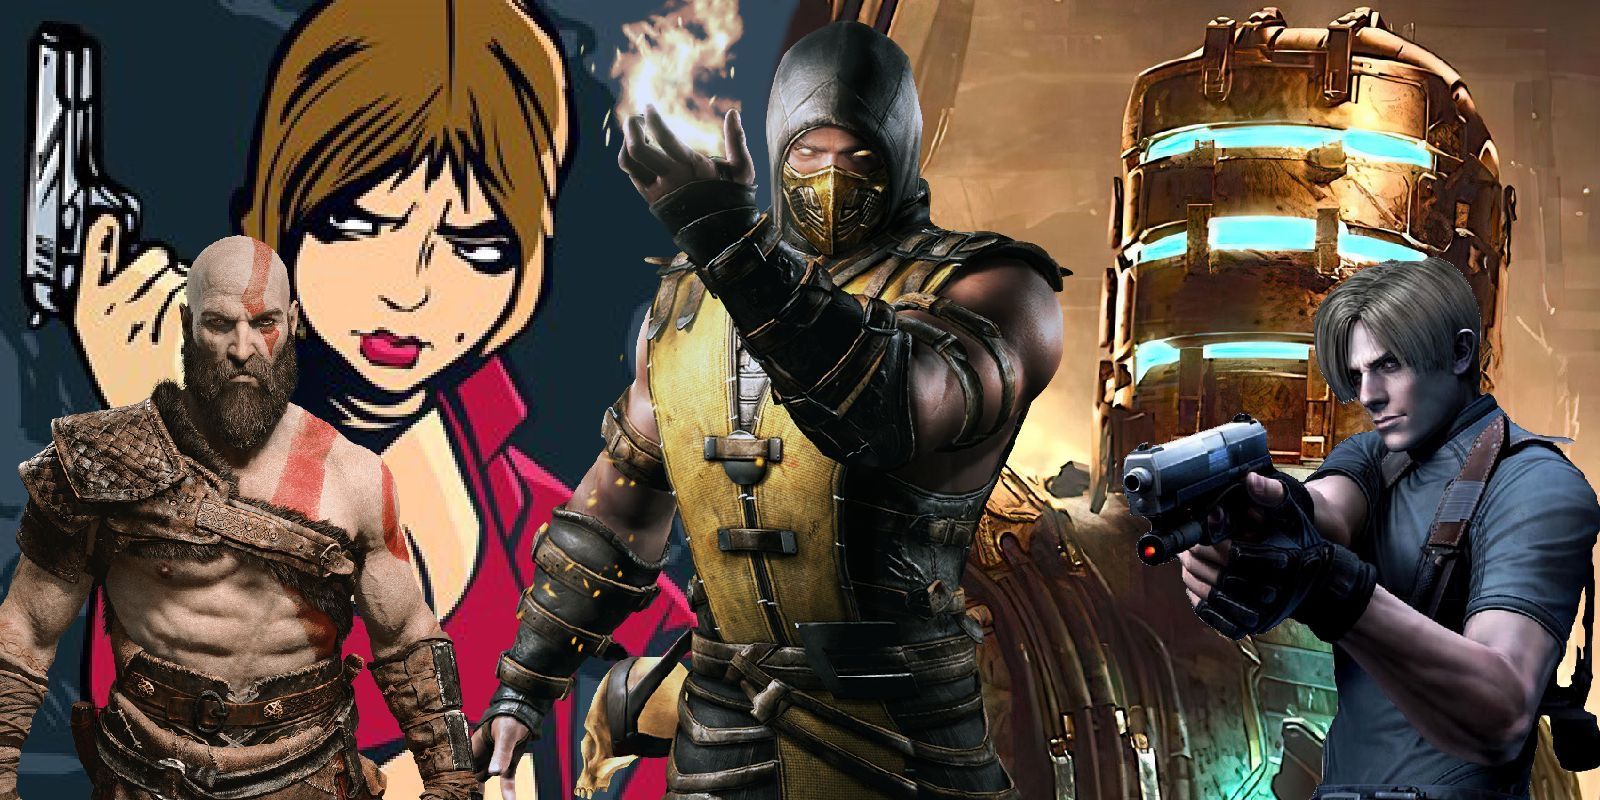 5 violent video game characters that would make great DLC guests